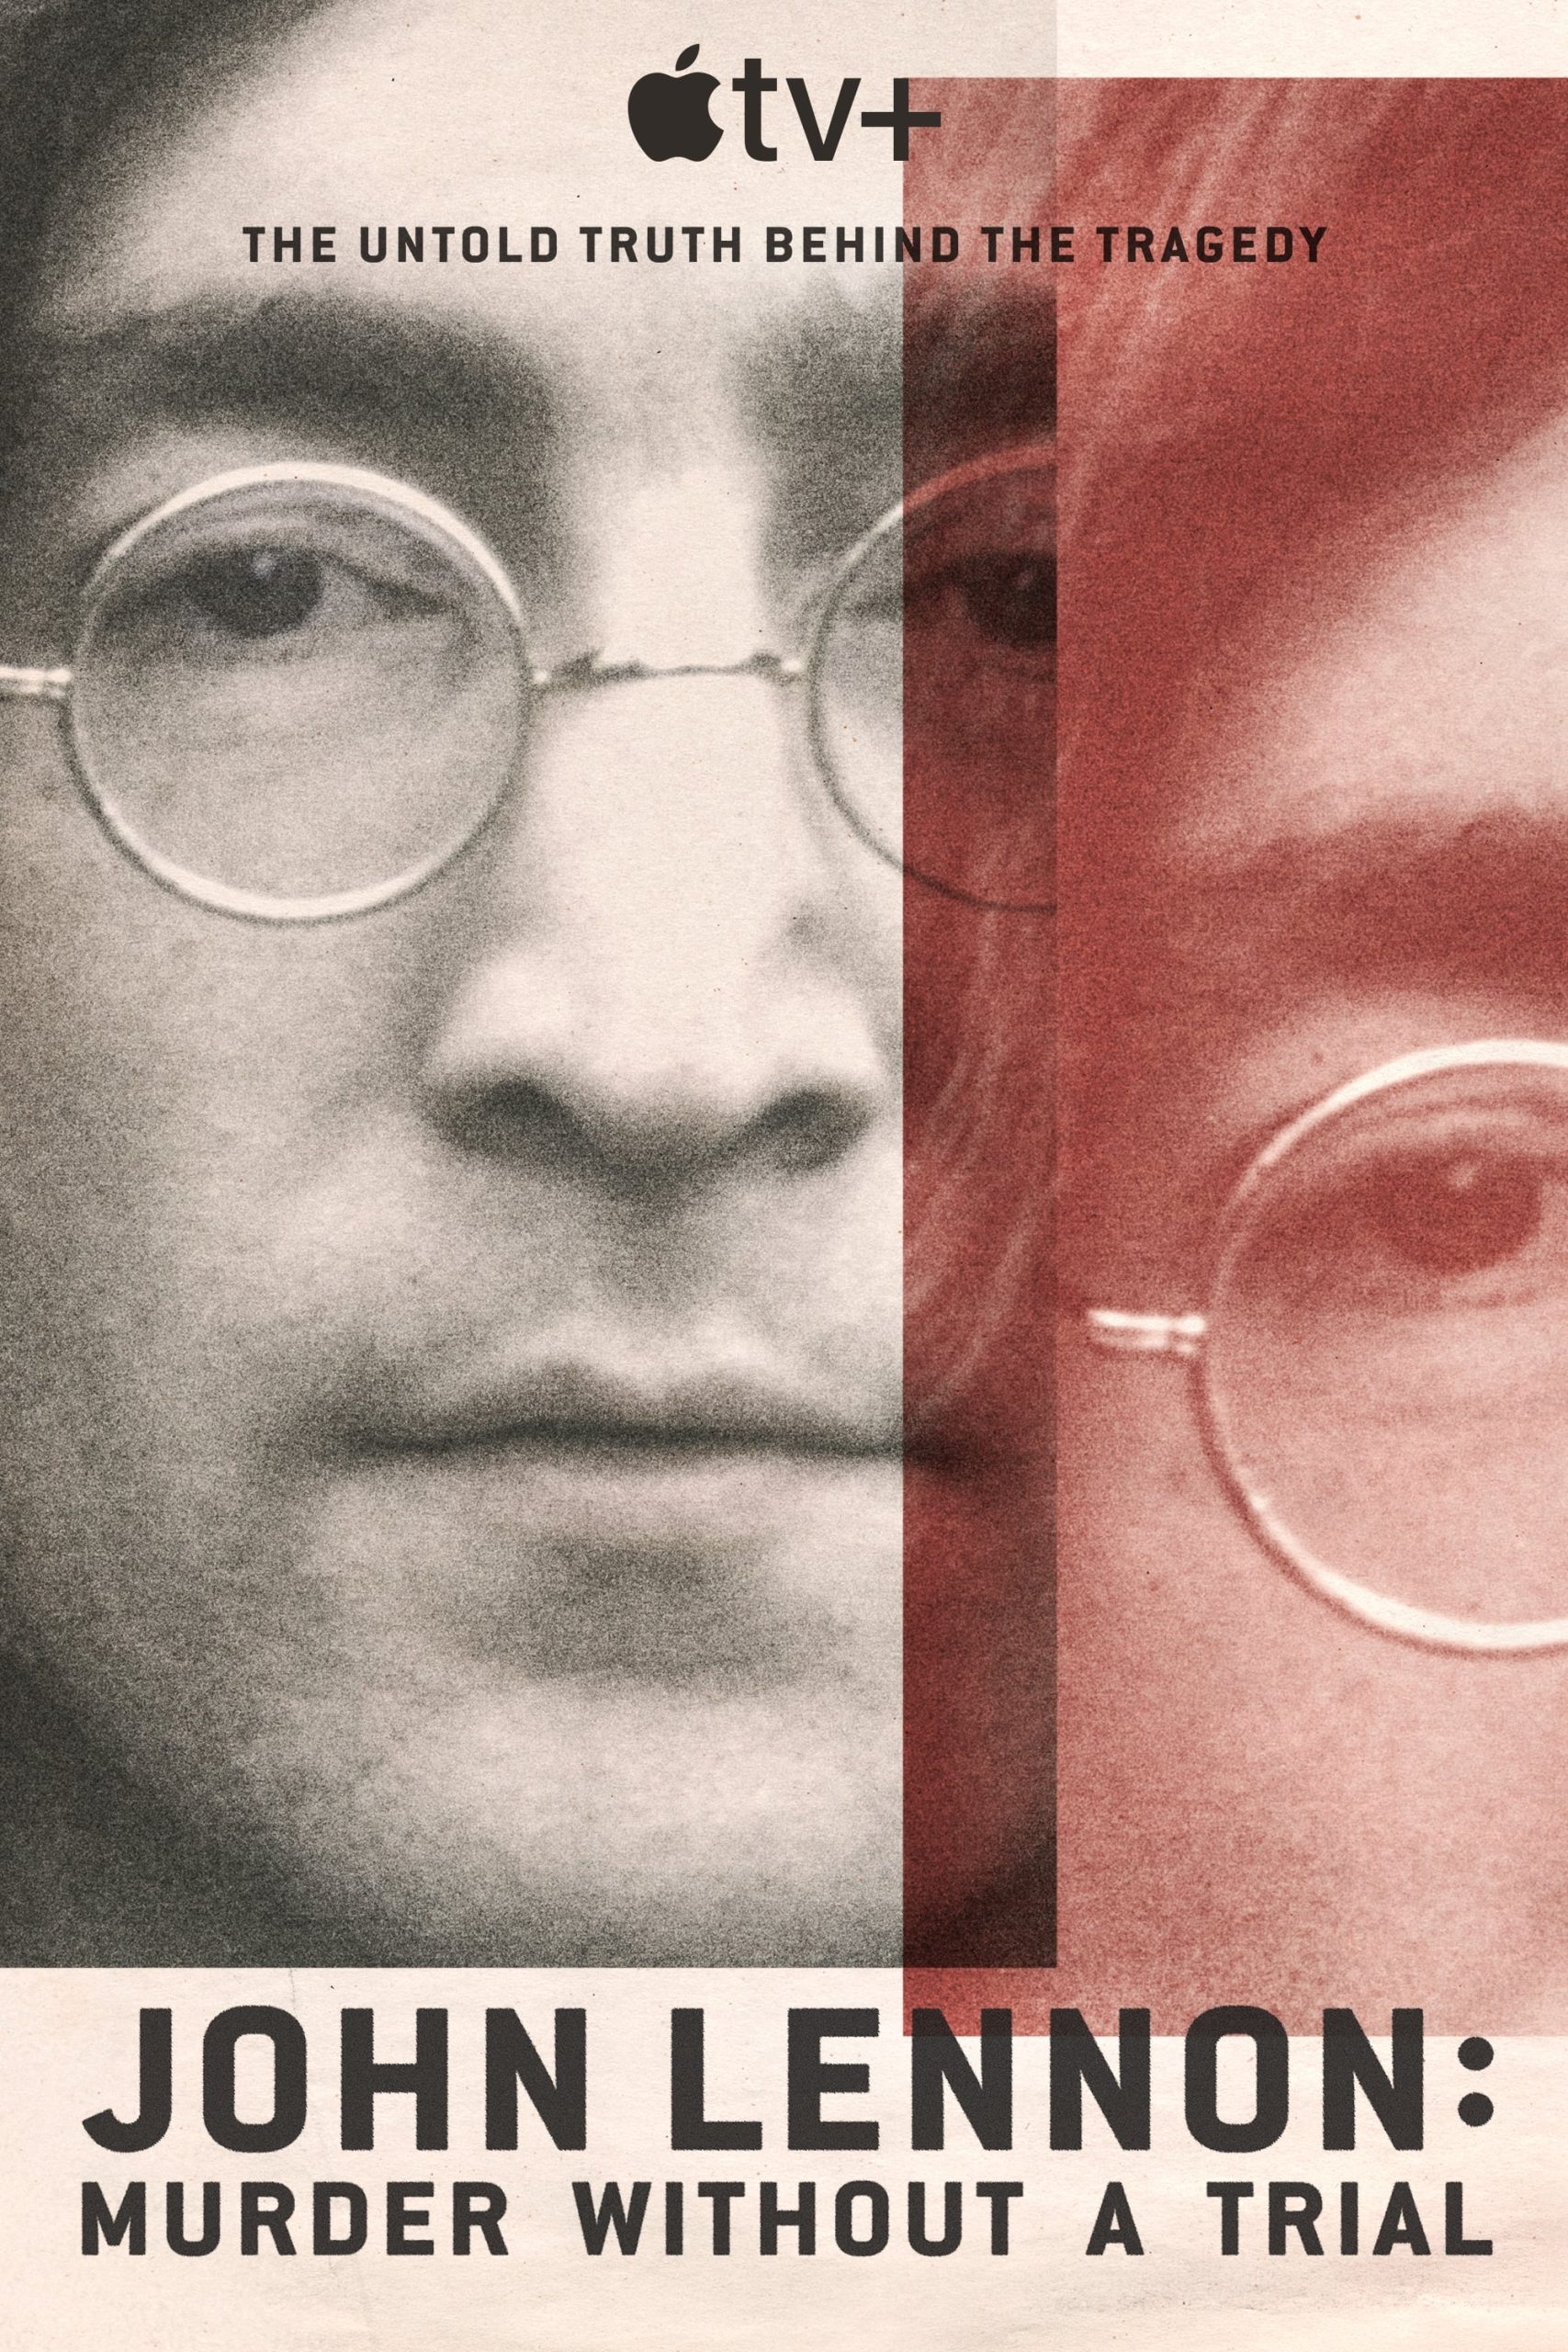 John Lennon Murder Without a Trial